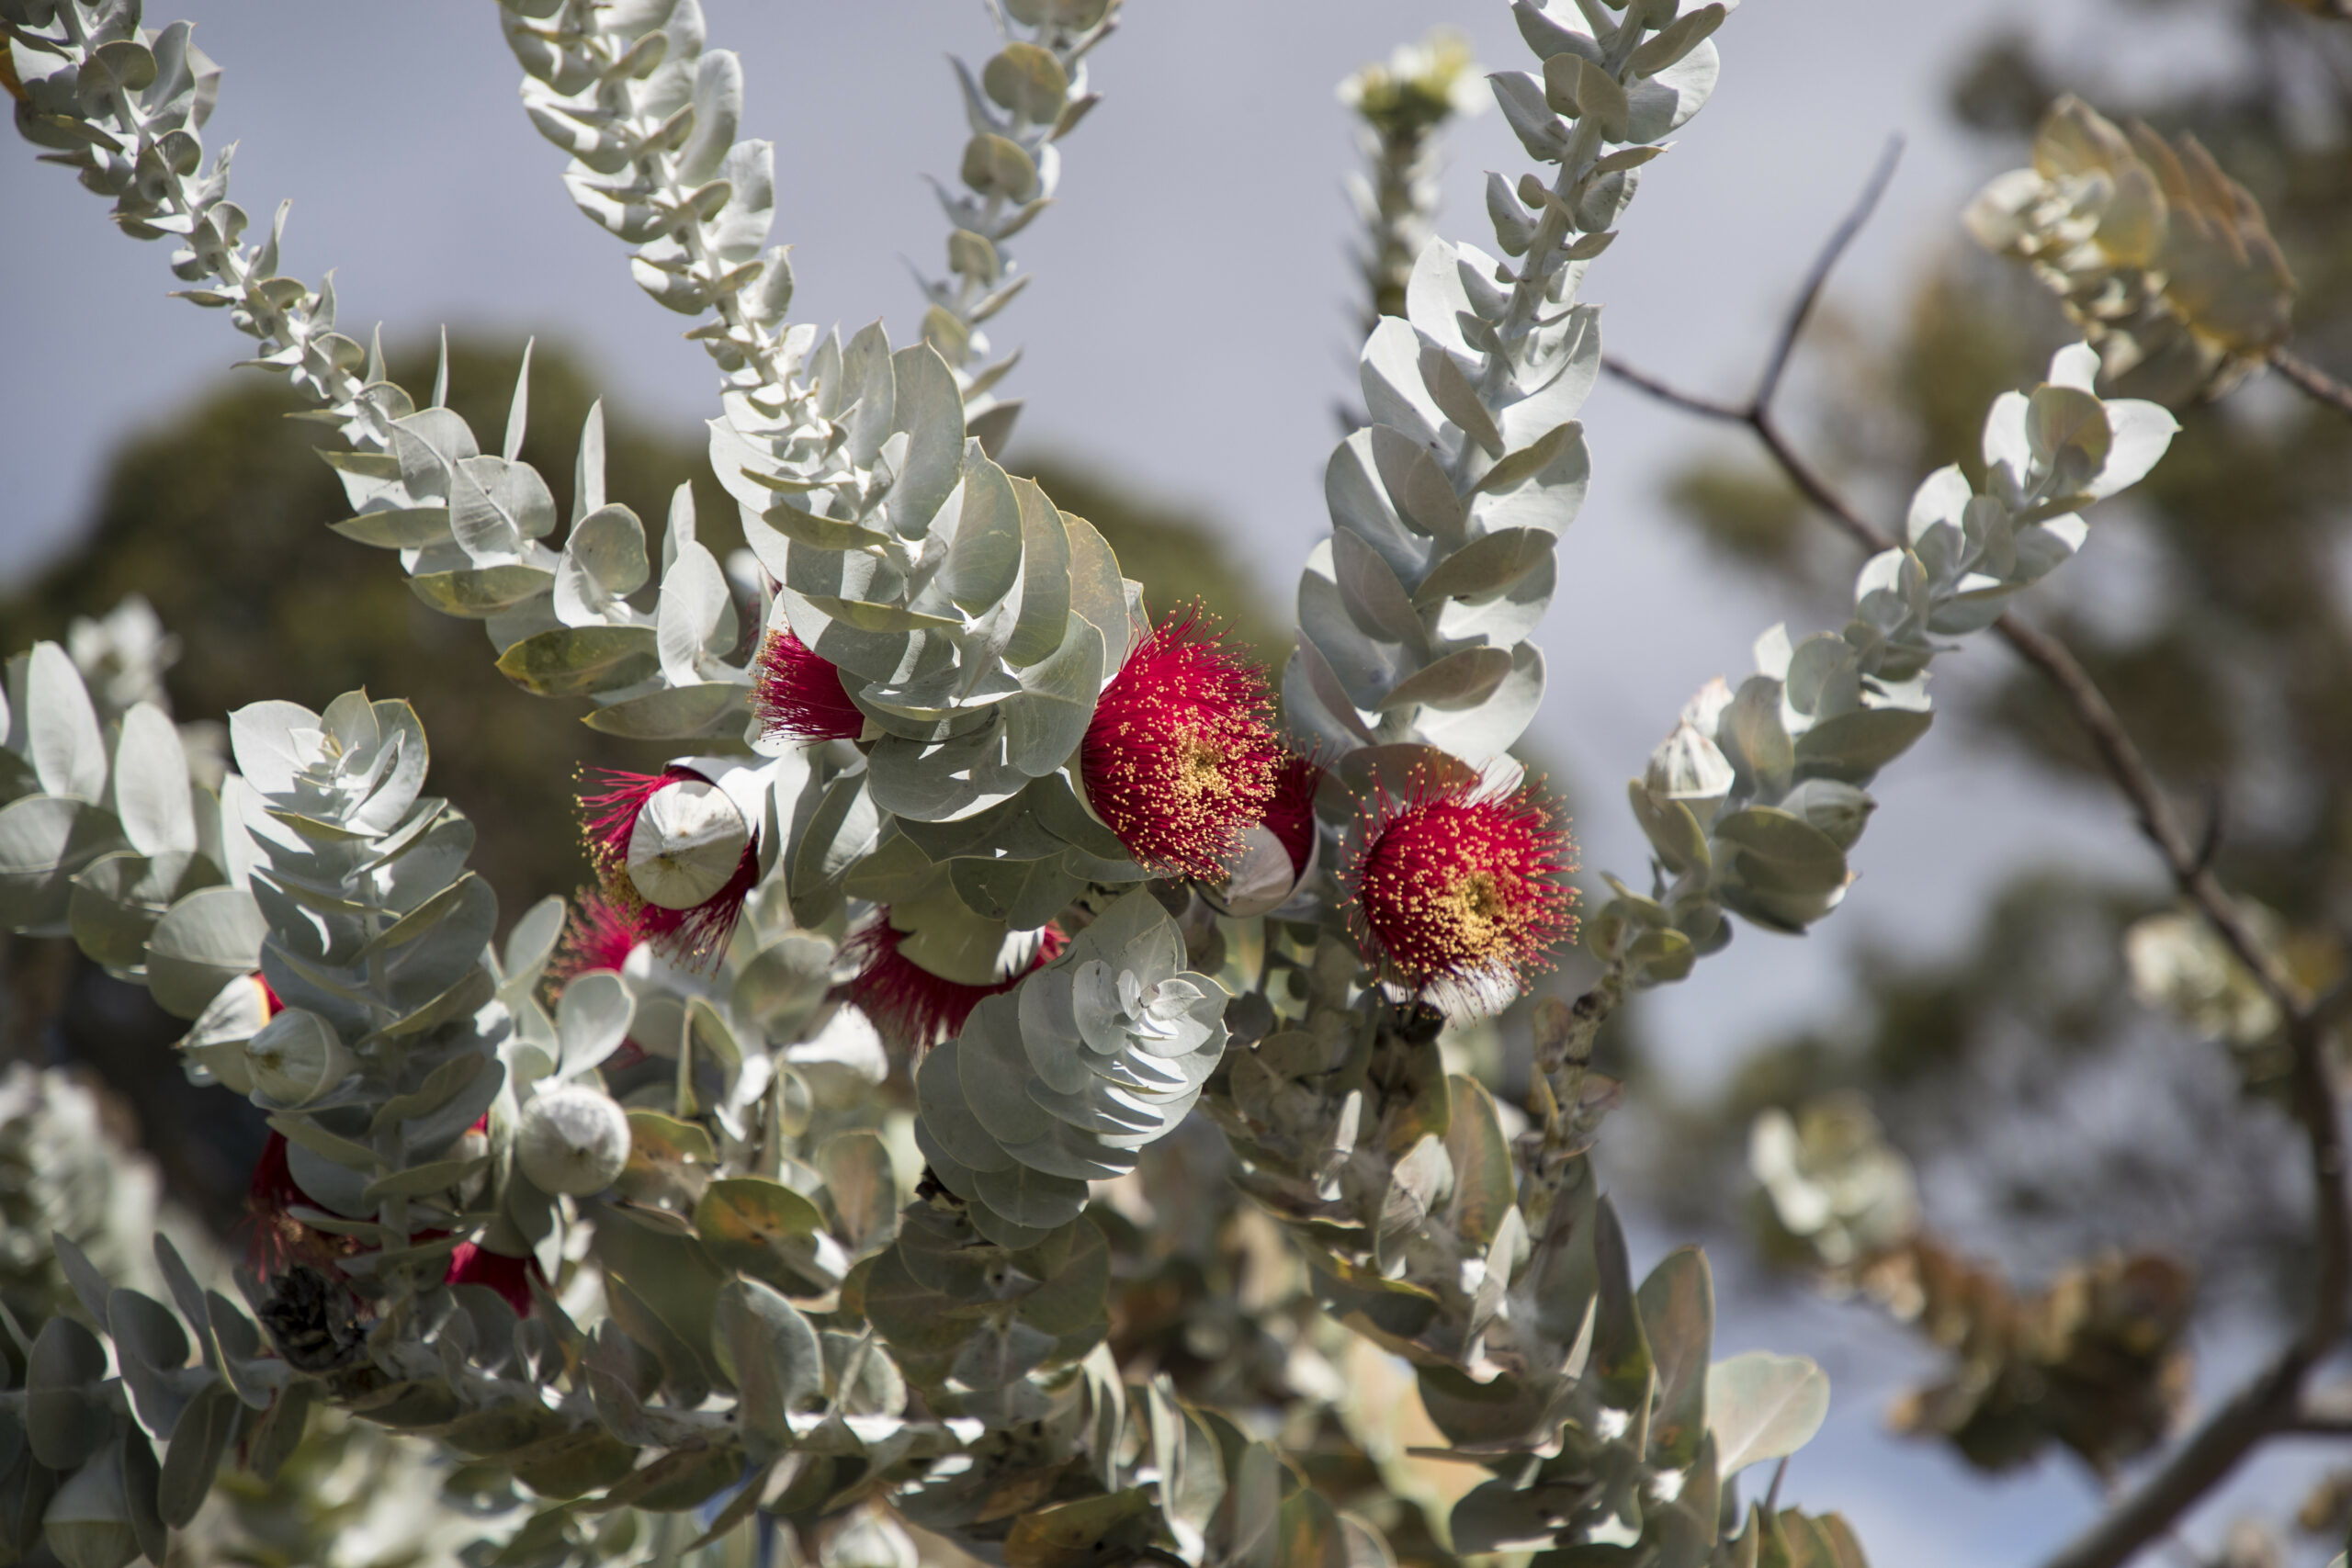 This is a photo of a mottlecah plant. It has red flowers with yellow tips. Its rounded leaves are a light grey colour. They form clusters along the stem of the leaves, which are long and straight. The background of the photo is blurred, showing the green natural environment behind the plant.